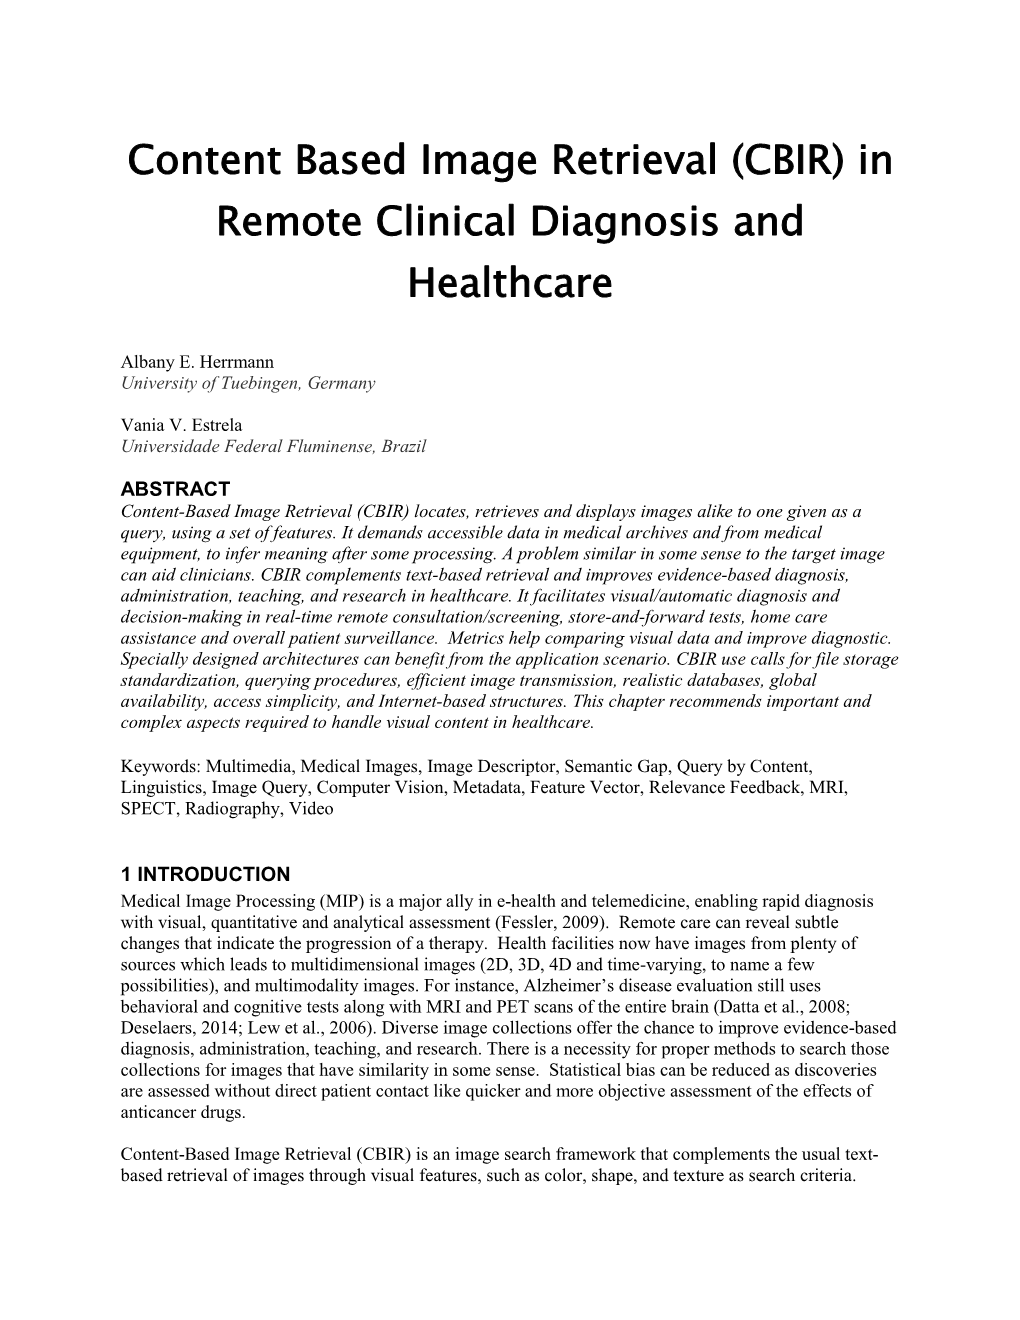 CBIR) in Remote Clinical Diagnosis and Healthcare